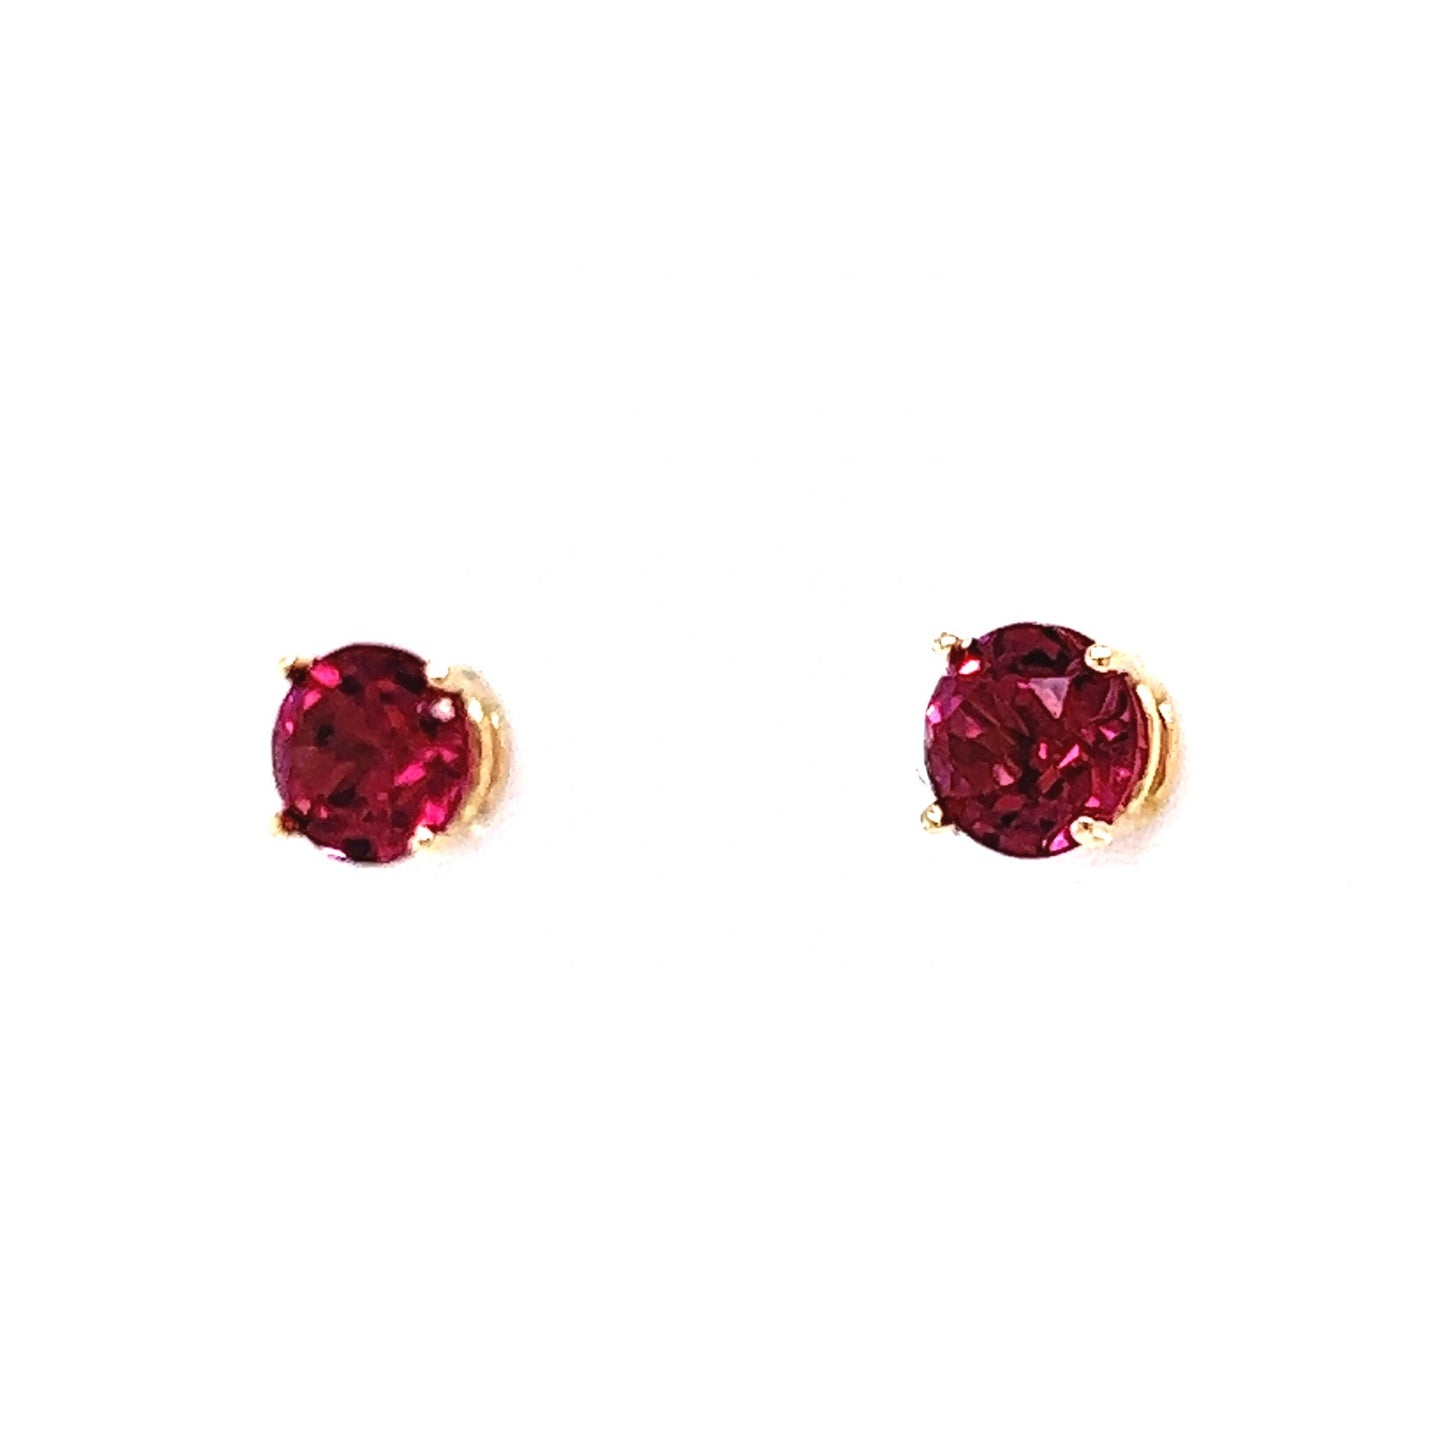 Classic Round Cut Pink Tourmaline Earrings in 14k Yellow Gold